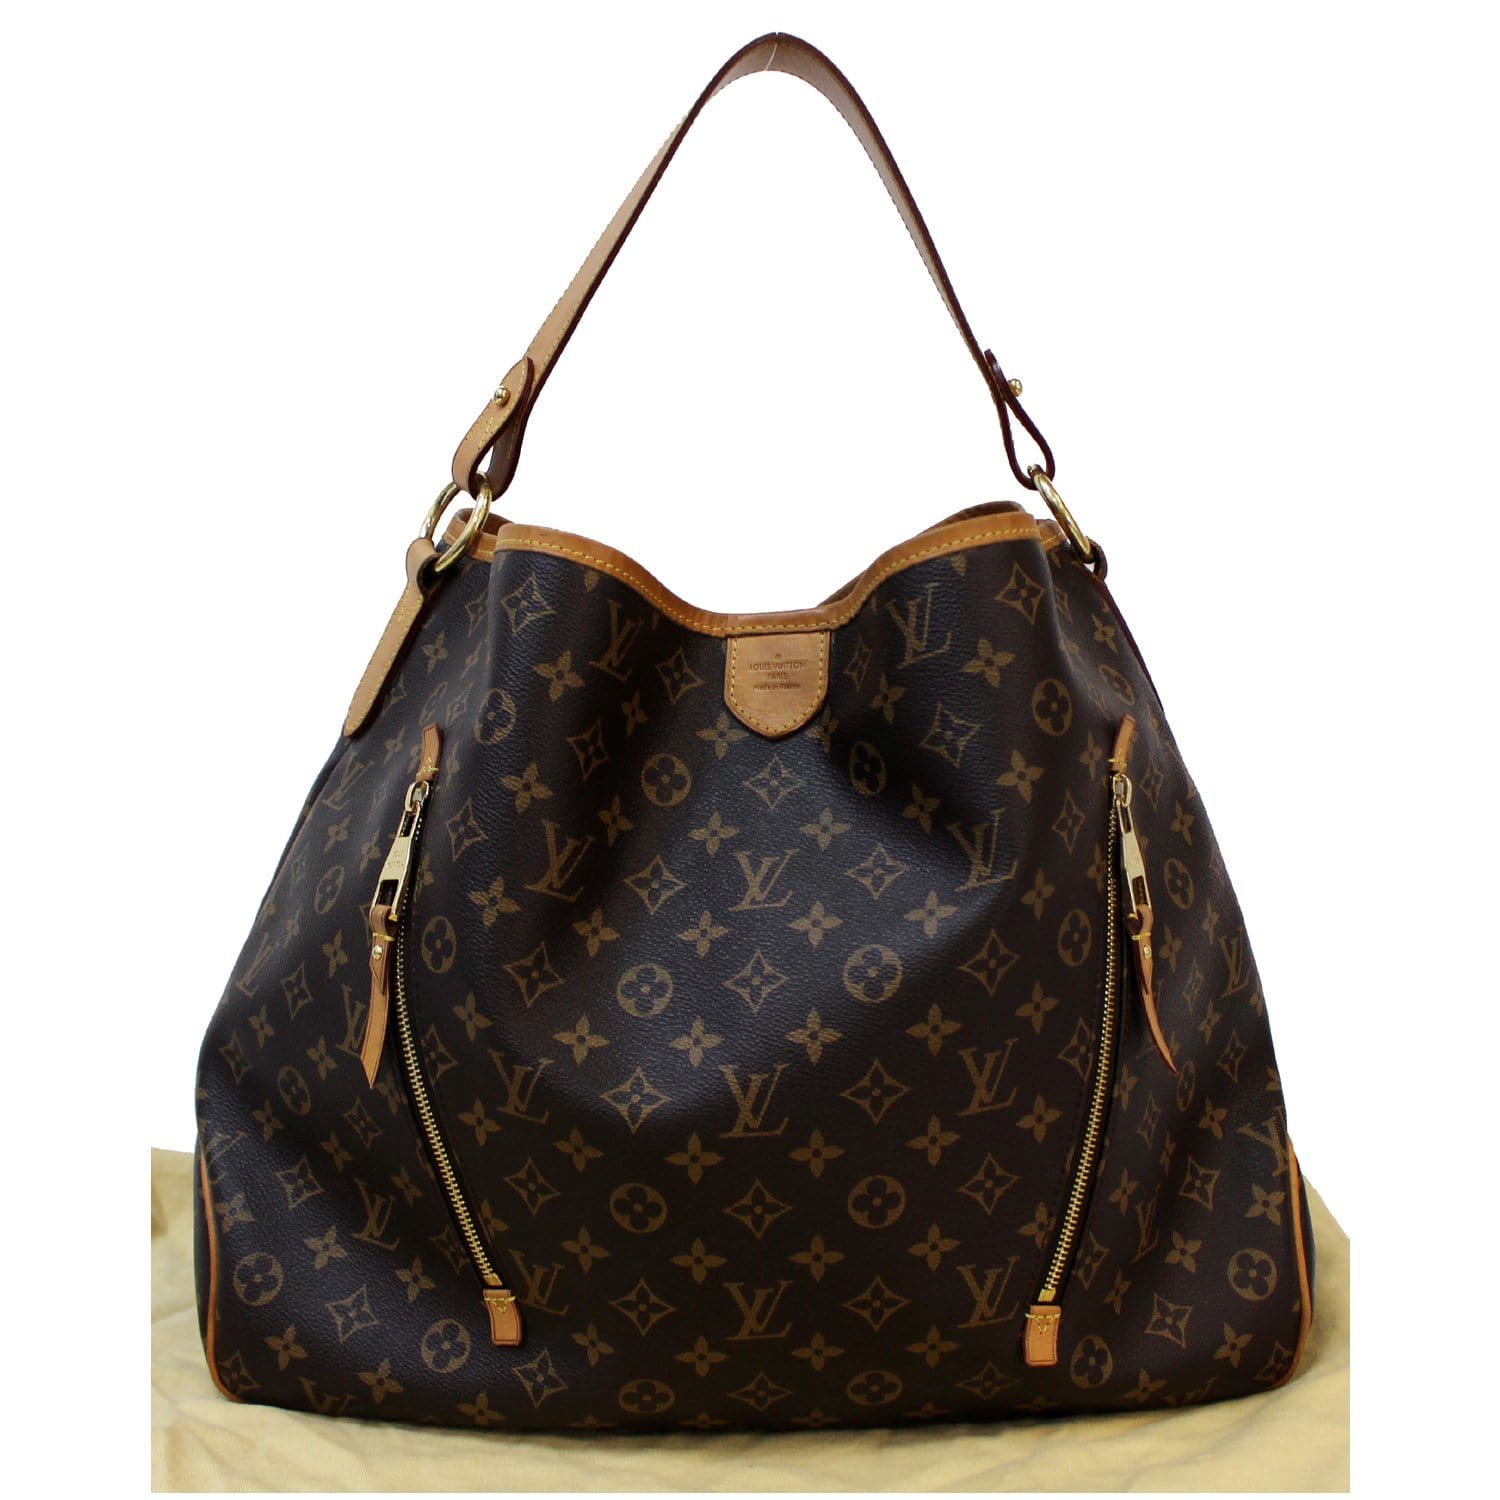 Review and modeling shots Delightful GM Louis Vuitton LV bag